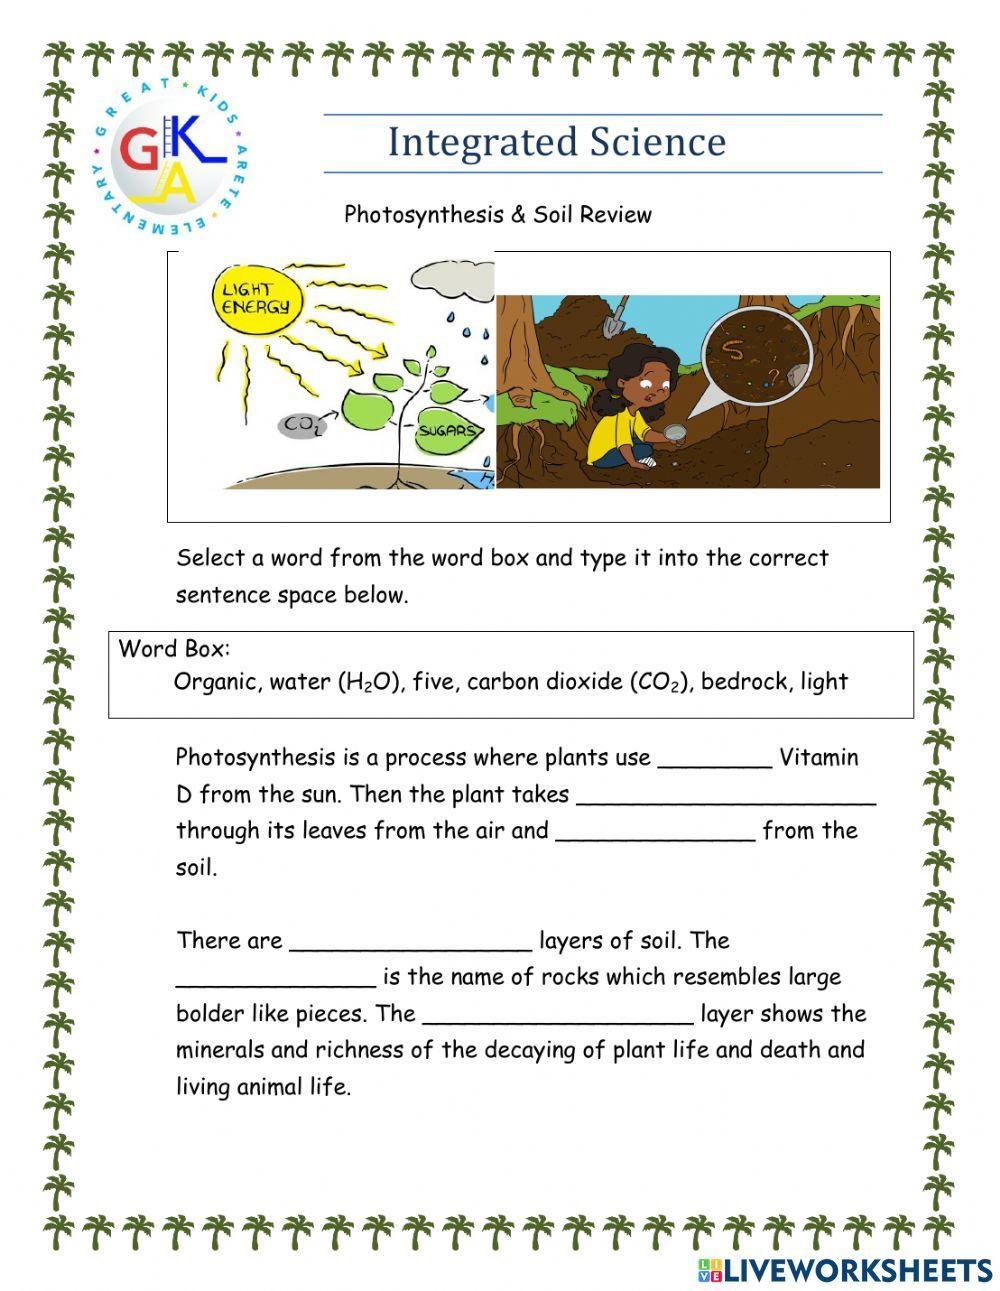 Photosynthesis & Soil Review